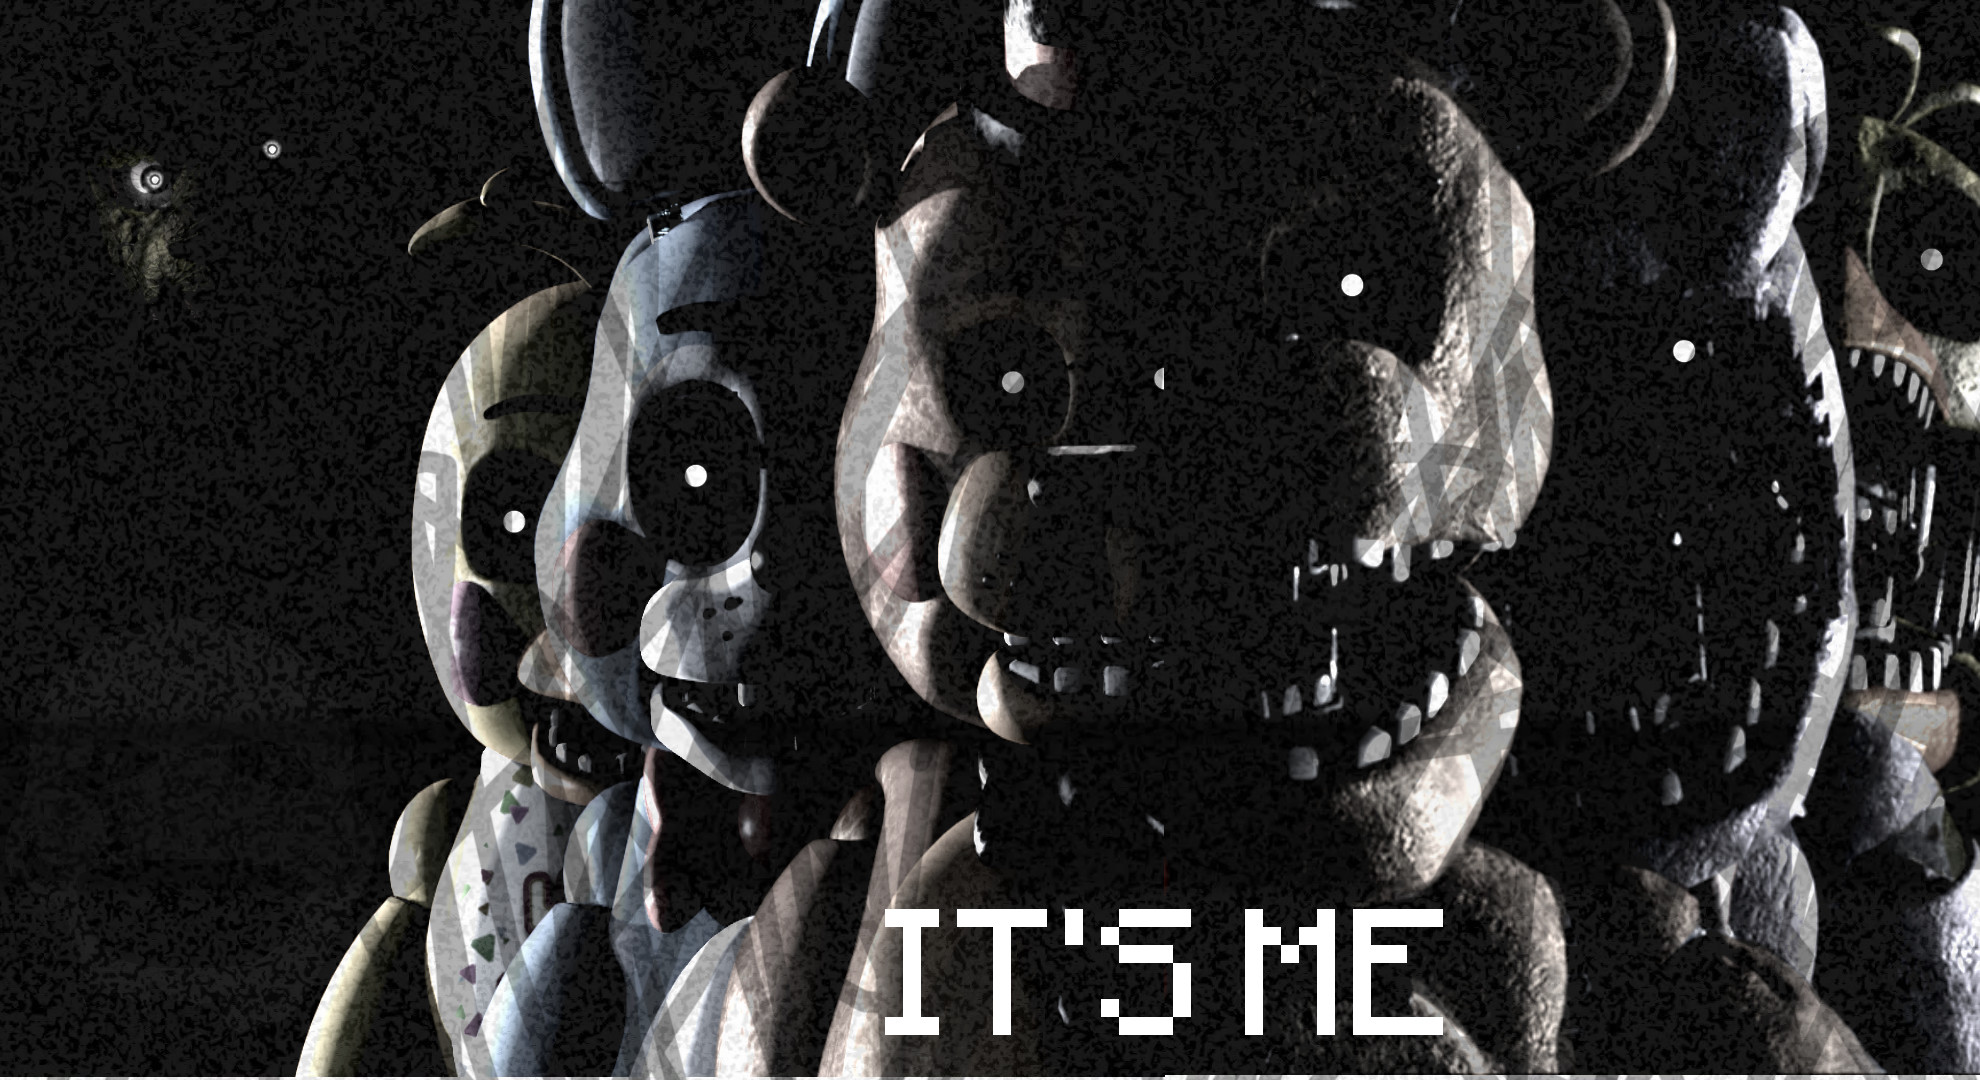 1980x1080 My Own FNAF Wallpaper. (You can download it if you'd like) ...